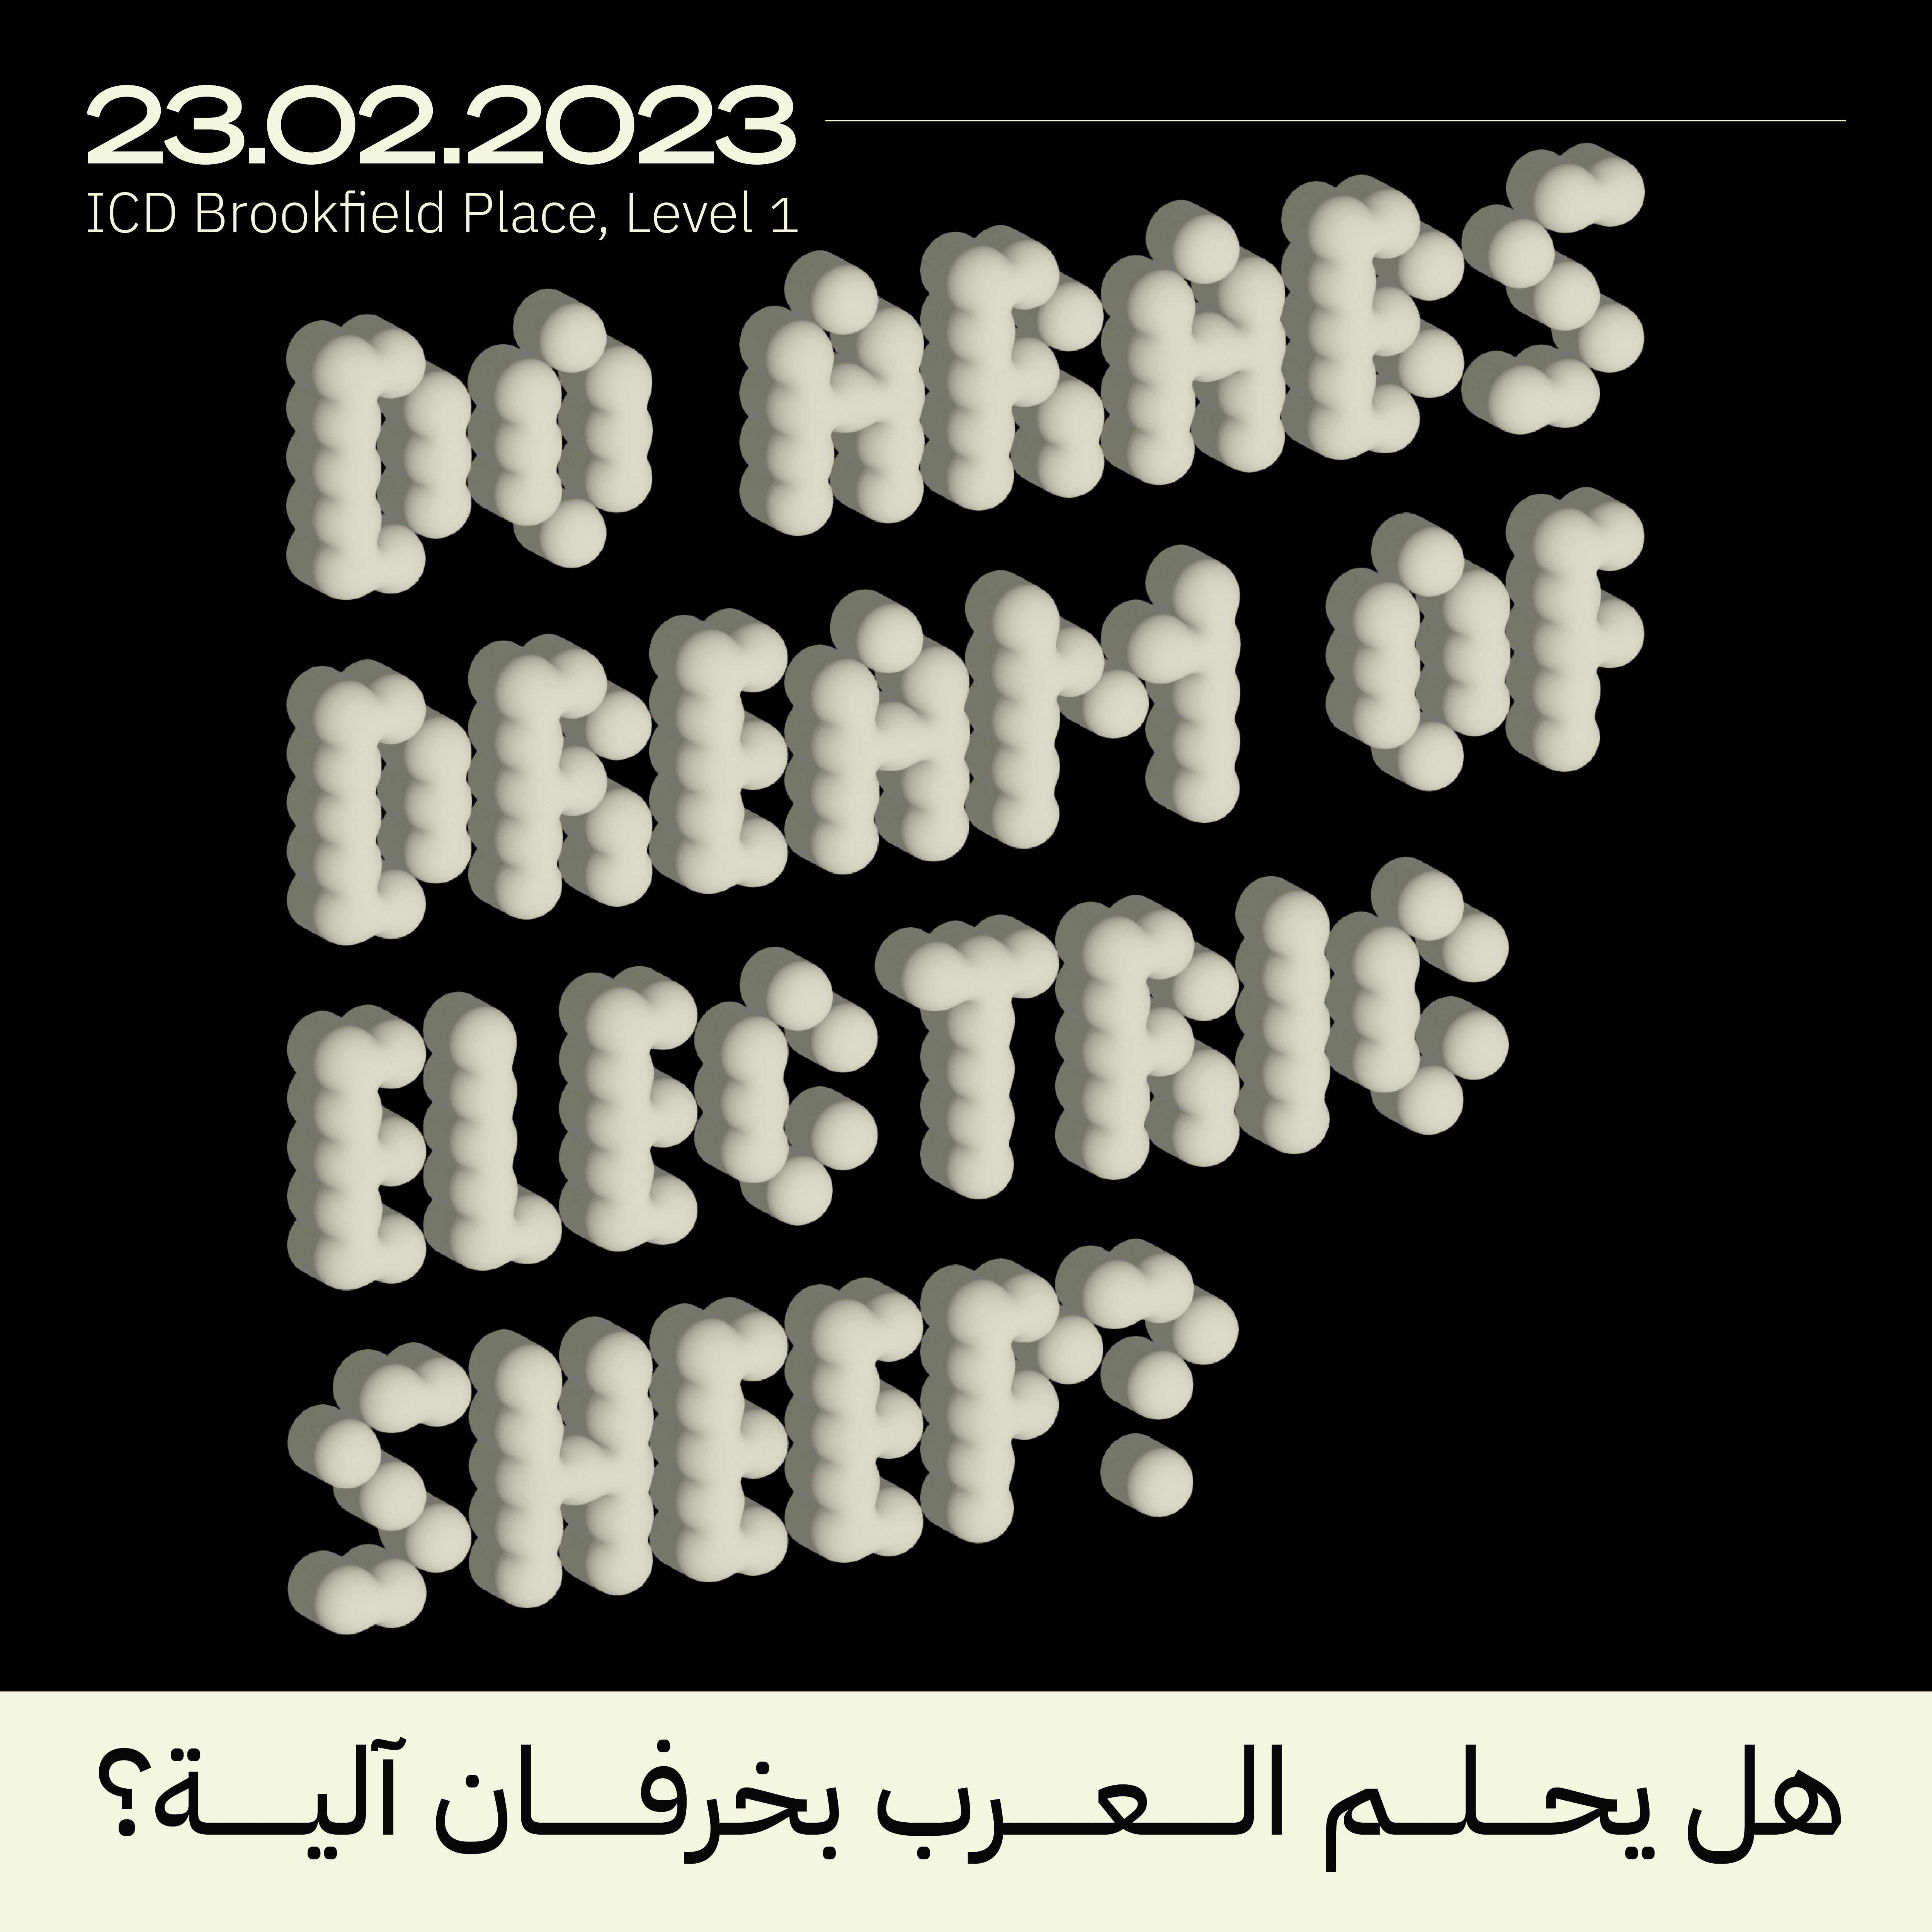 ICD Brookfield Place Dubai Introducing Group Show “Do Arabs Dream of Electric Sheep?”